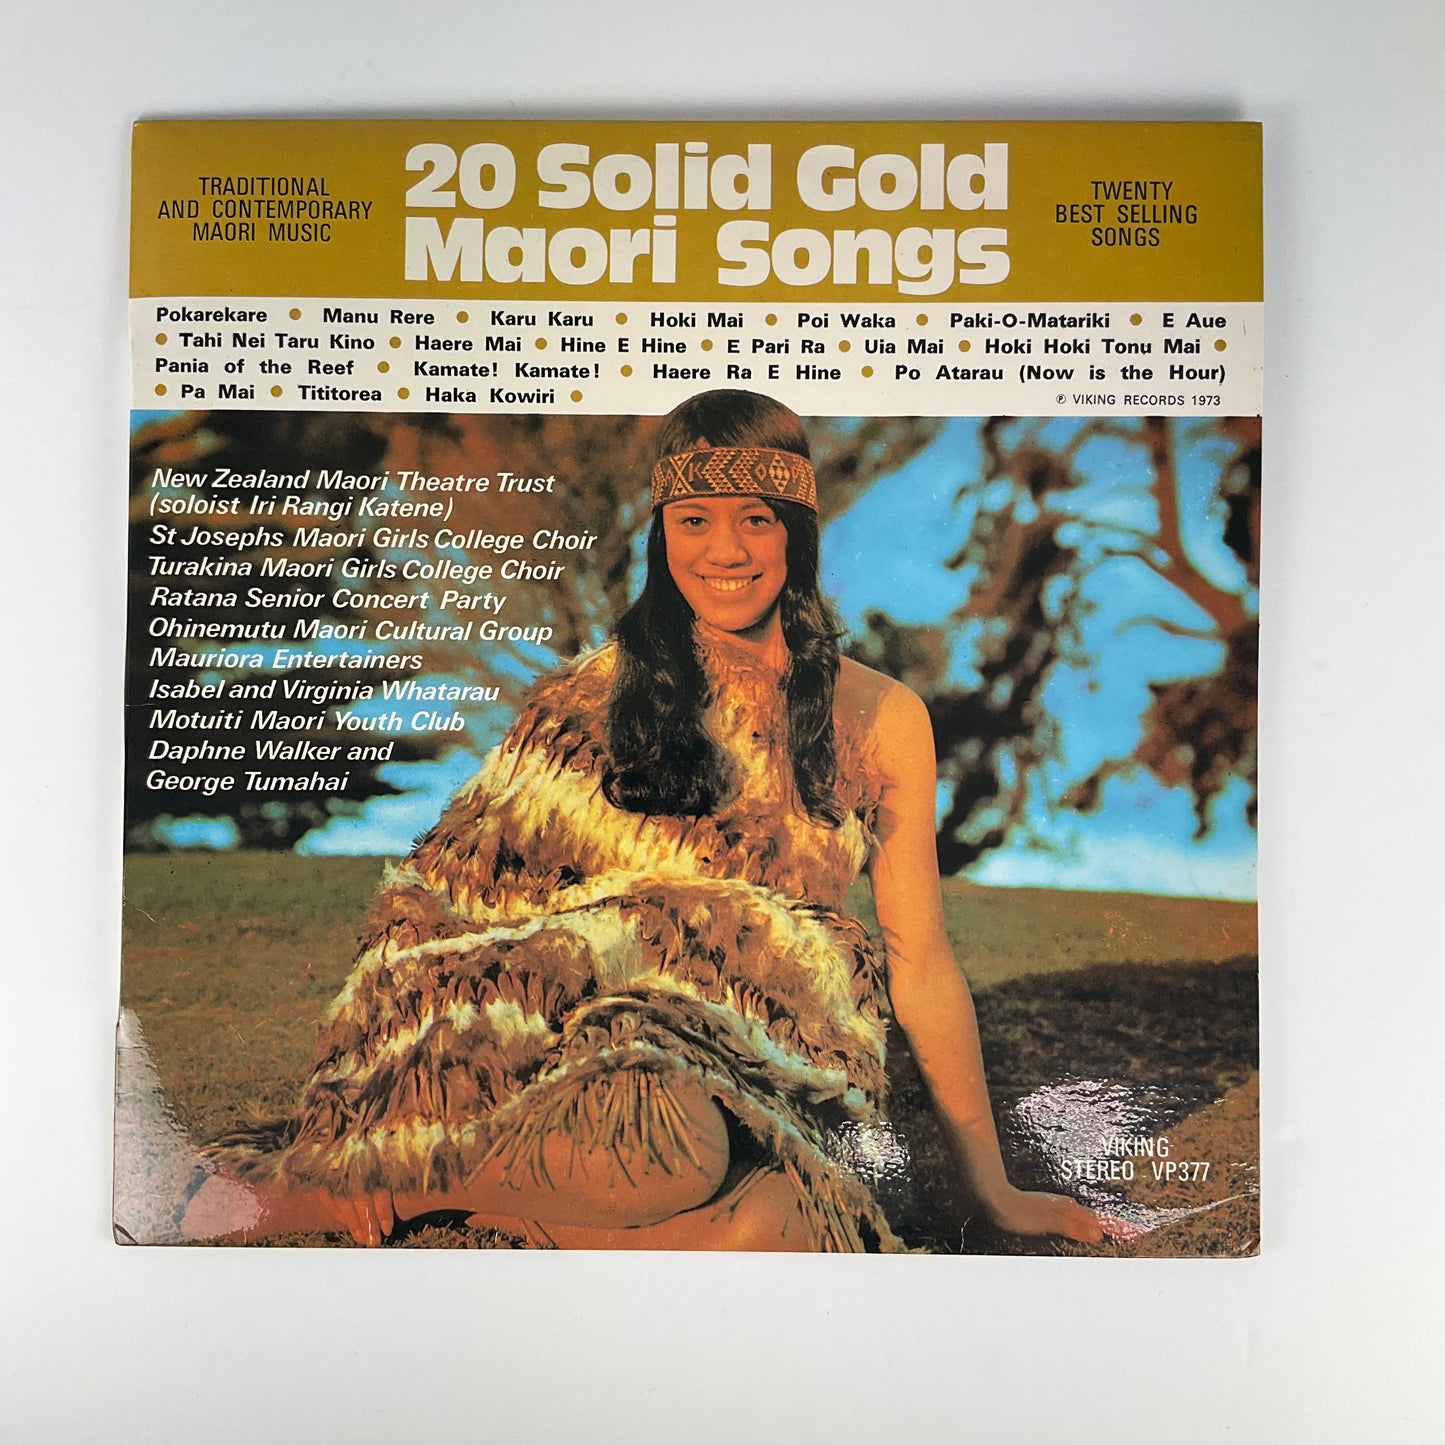 Viking Records - 20 Solid Gold Maori Songs